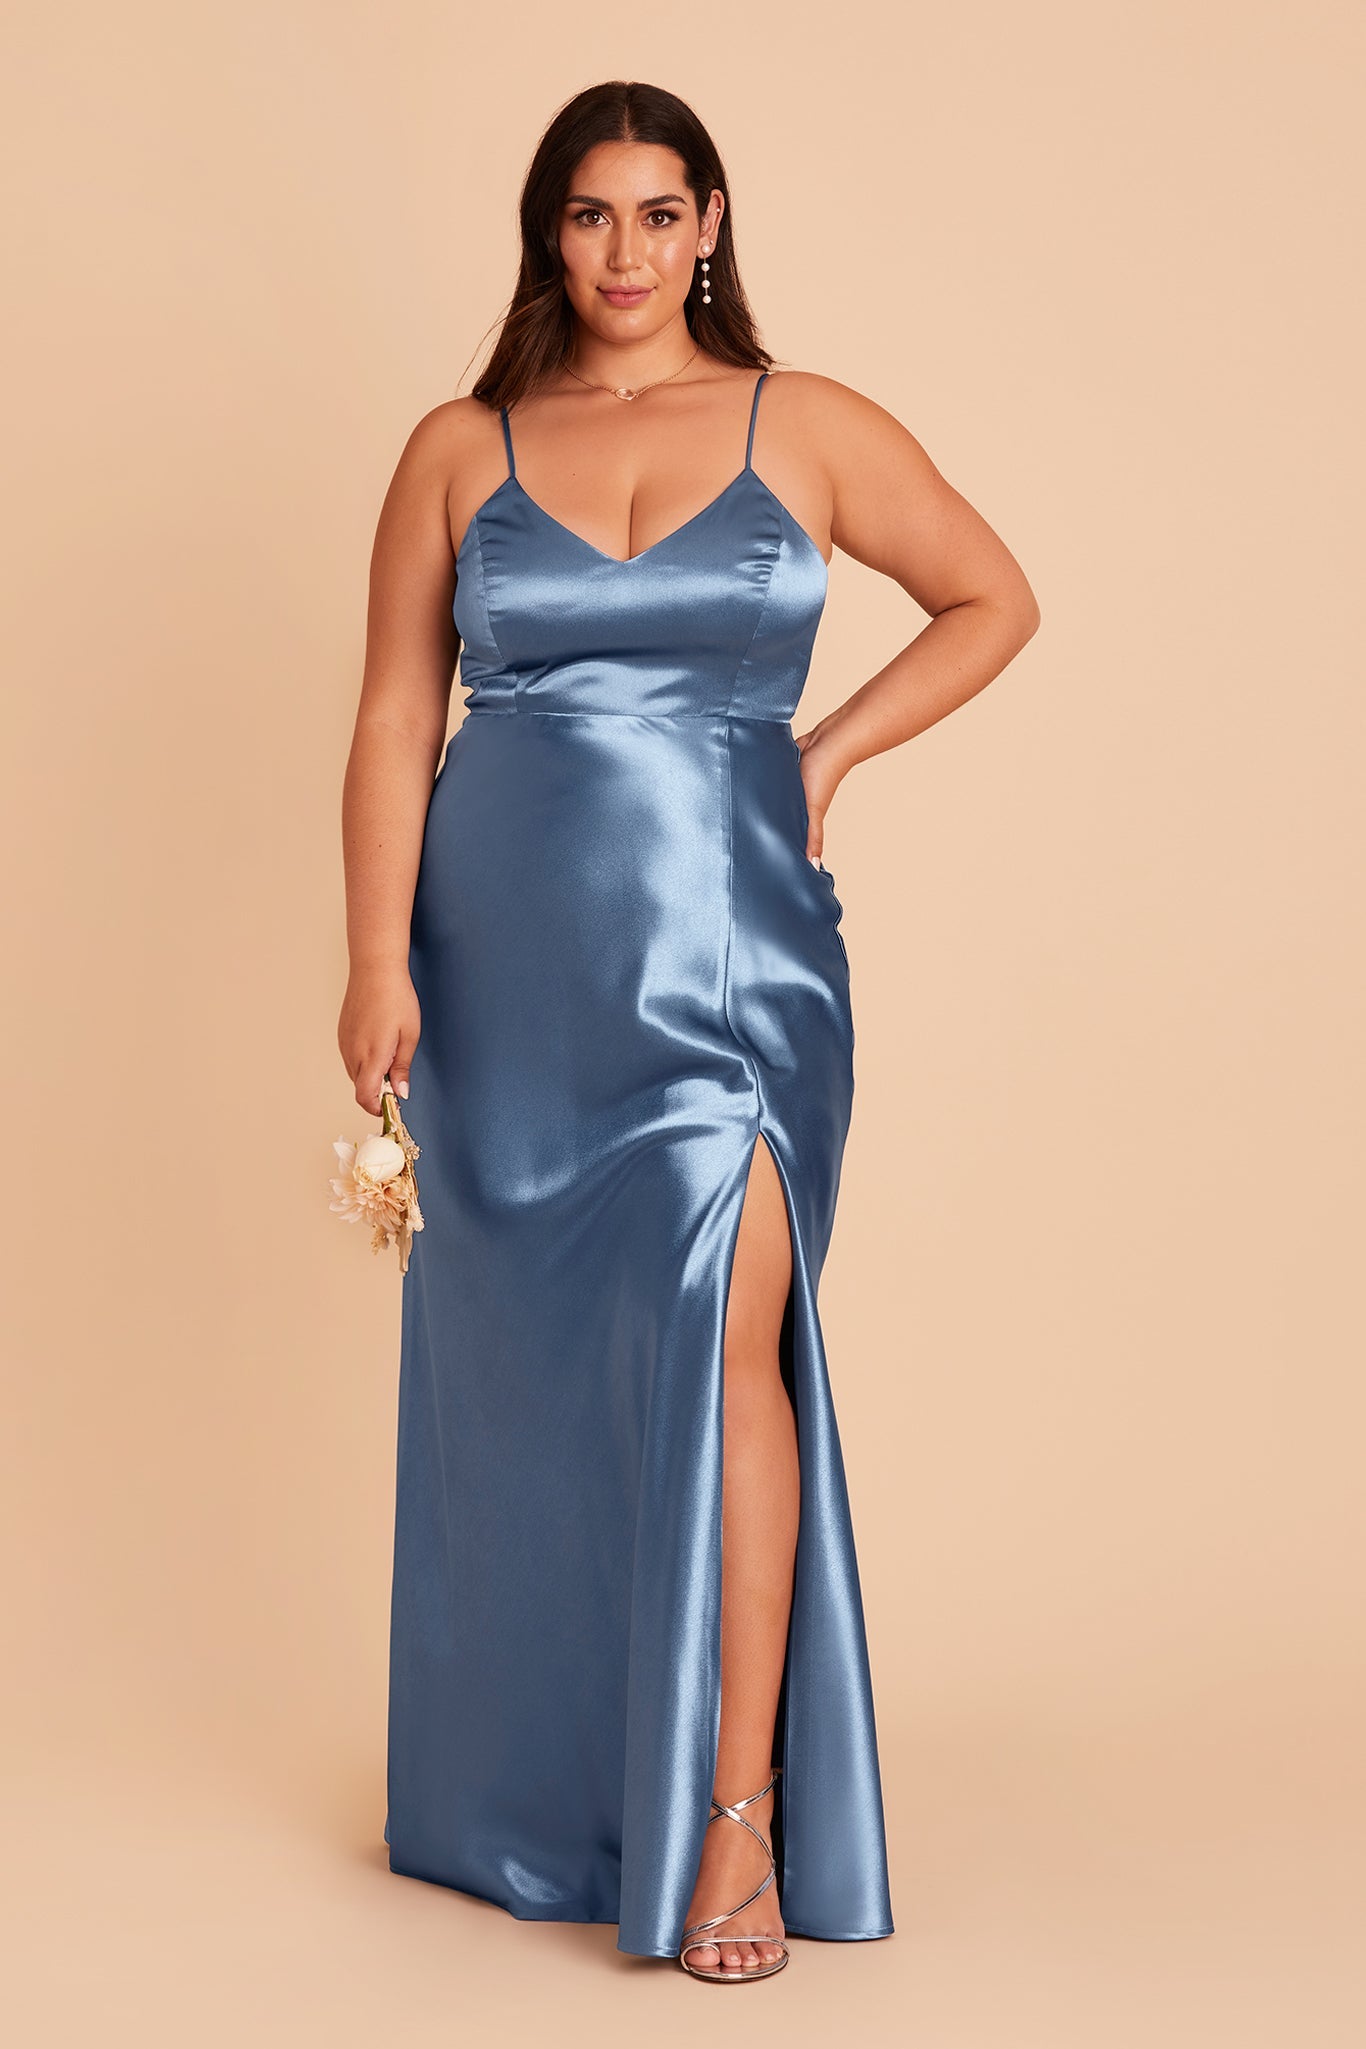 Jay plus size bridesmaid dress with slit in twilight satin by Birdy Grey, front view